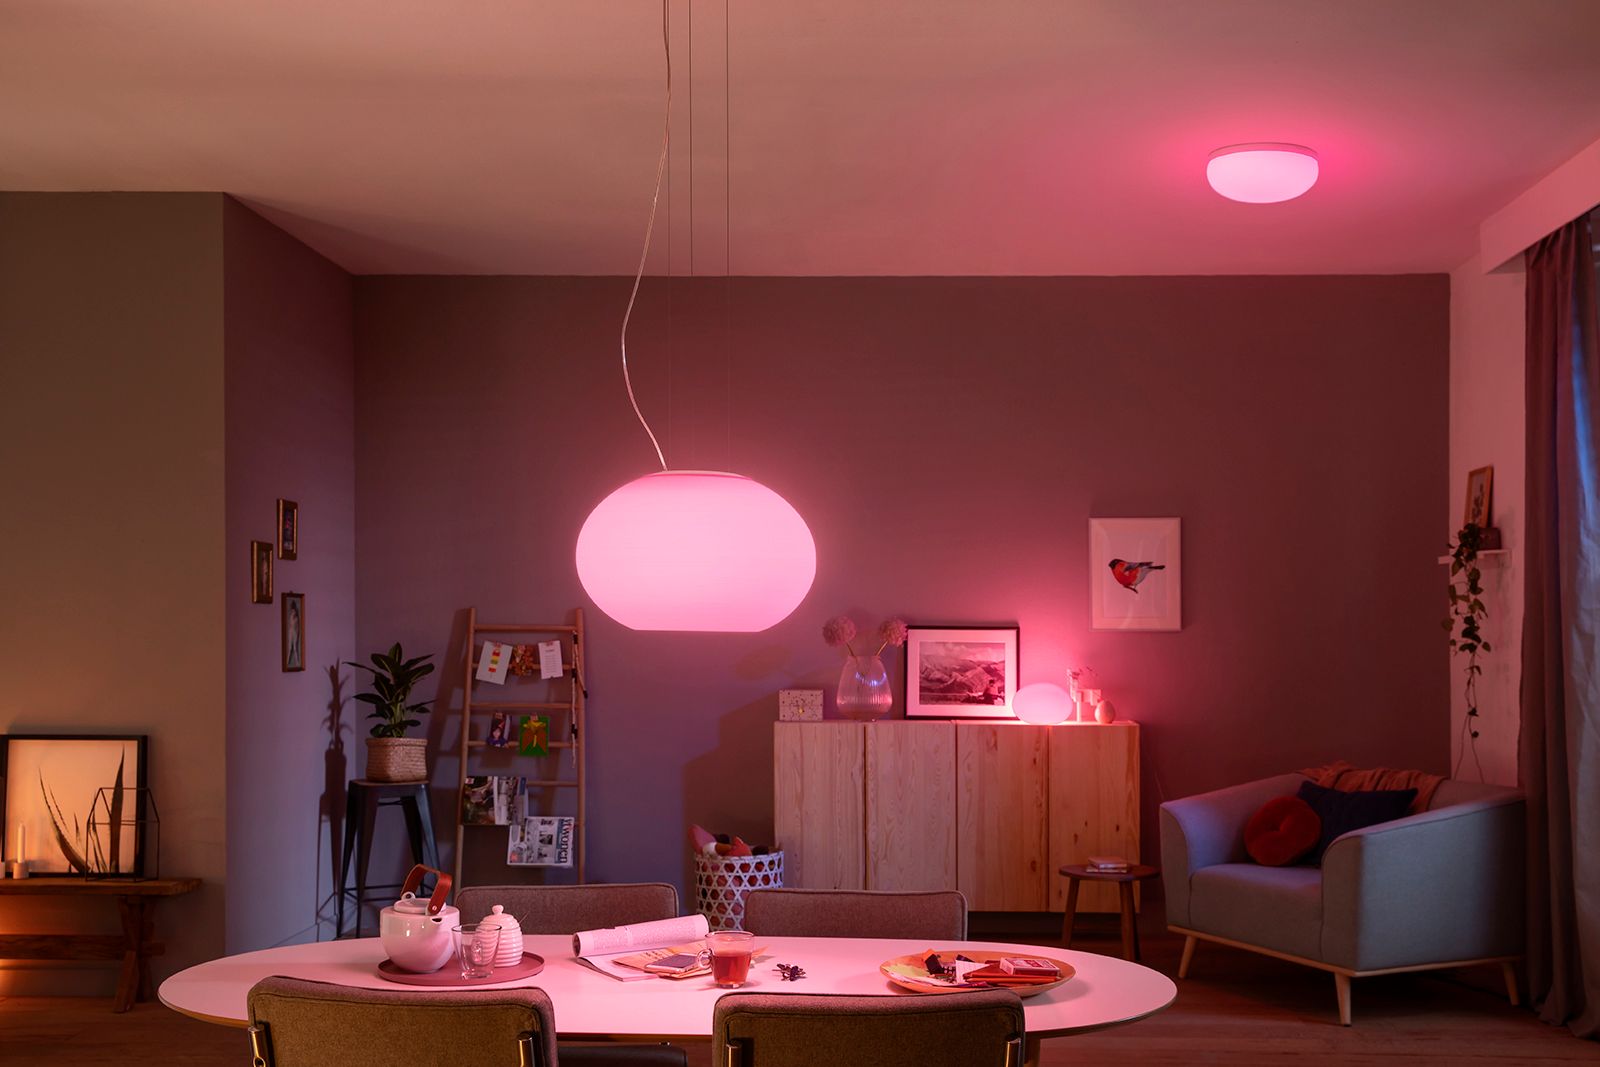 Best Philips Hue deals and discounts for Amazon Prime Day 2019 Smart lighting savings to light up your life image 1